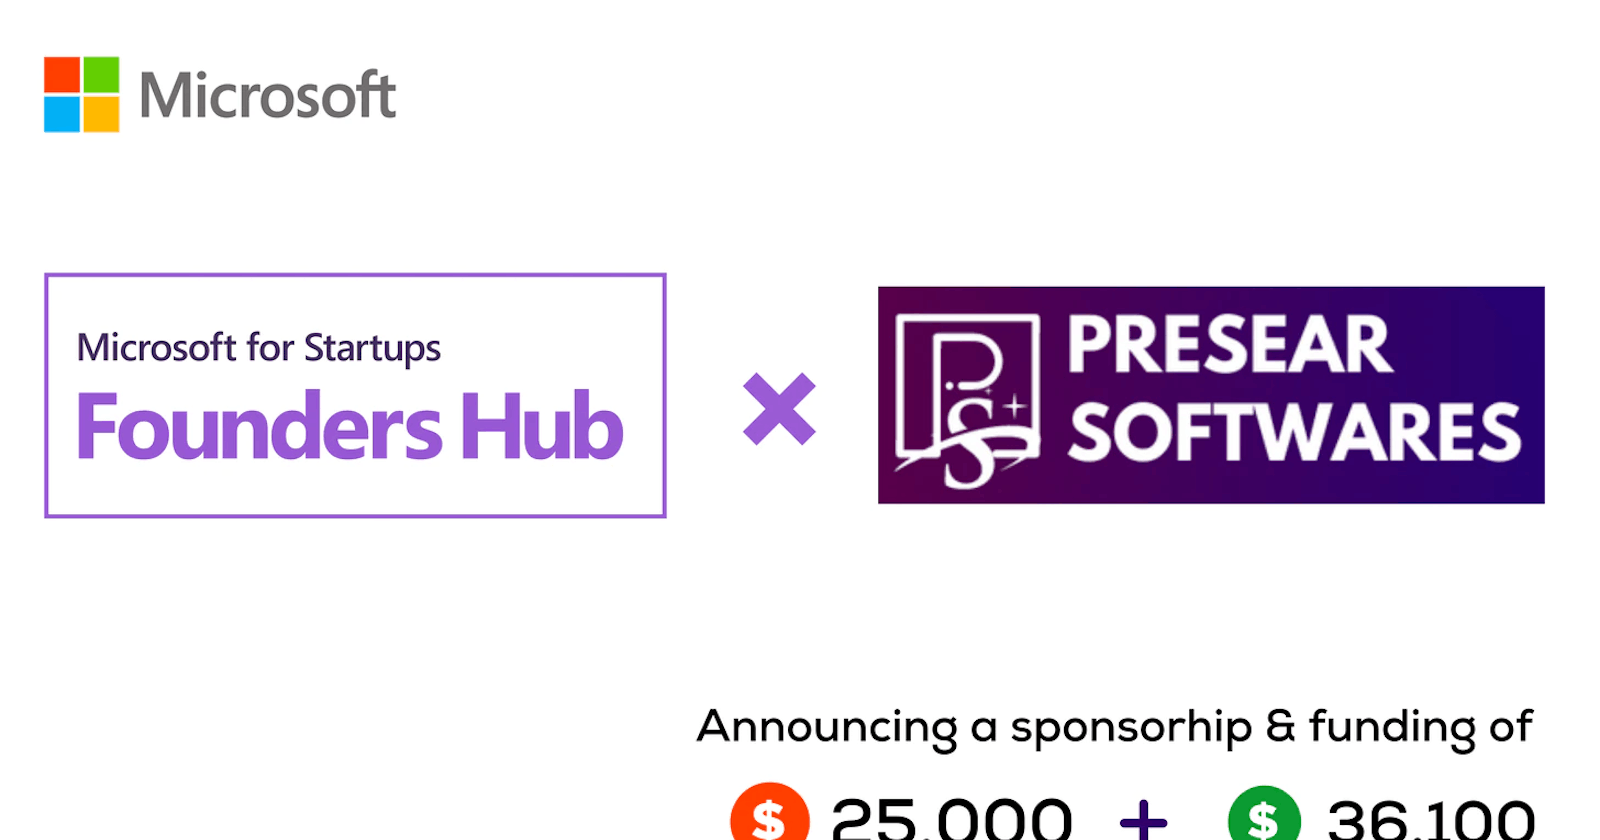 Presear Softwares has been accepted into Microsoft Founders' Hub program